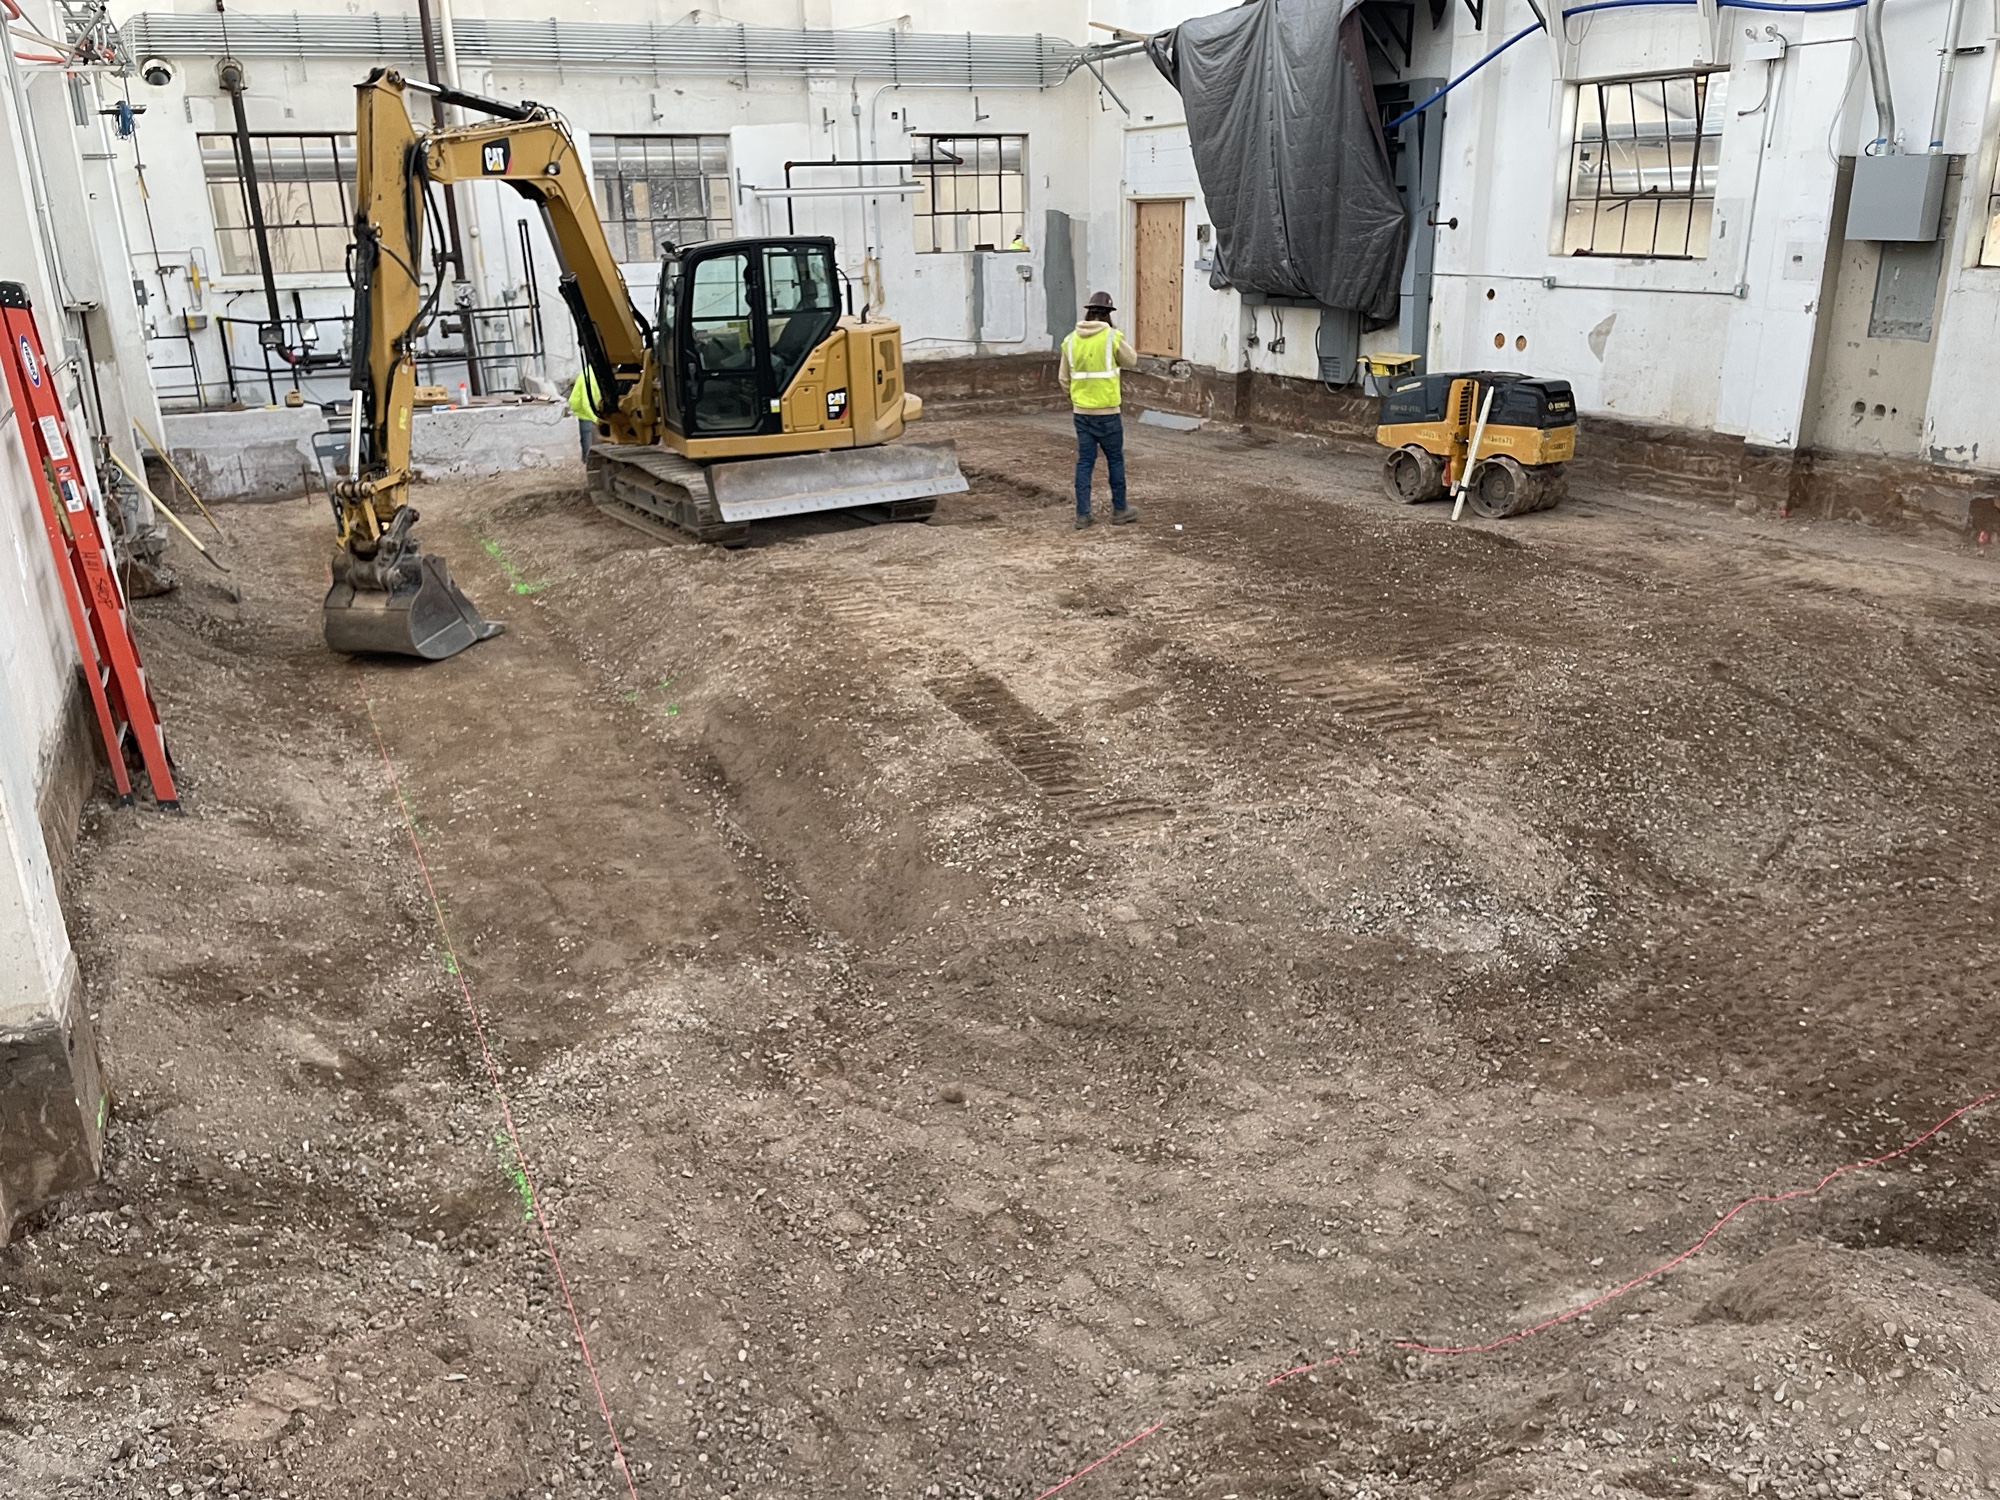 Detailed work by AccuRite Excavation at Hill Air Force Base, involving precise soil removal, structural fill importation, and grading for slab floor installation.